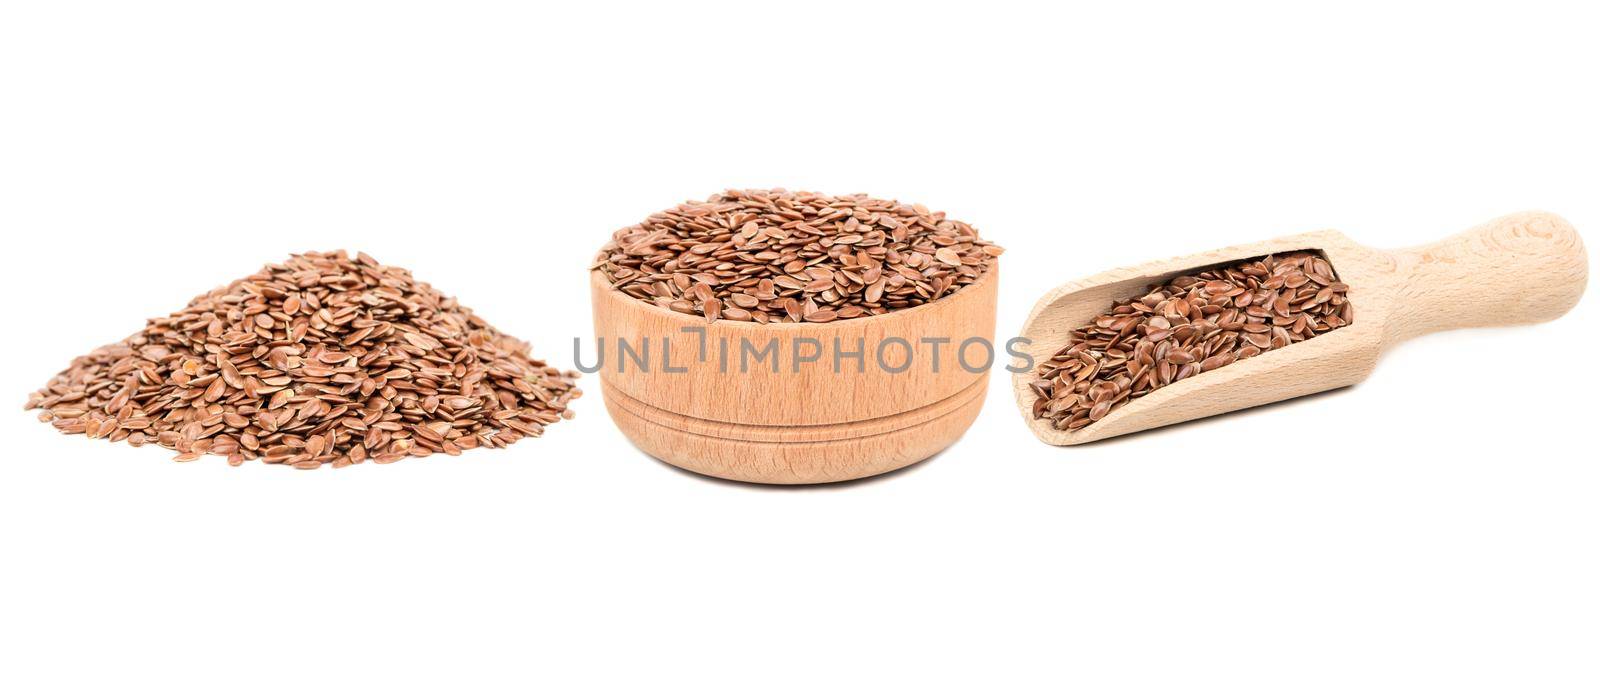 Dry flax seeds in a bowl and a scoop isolate on a white background, collection